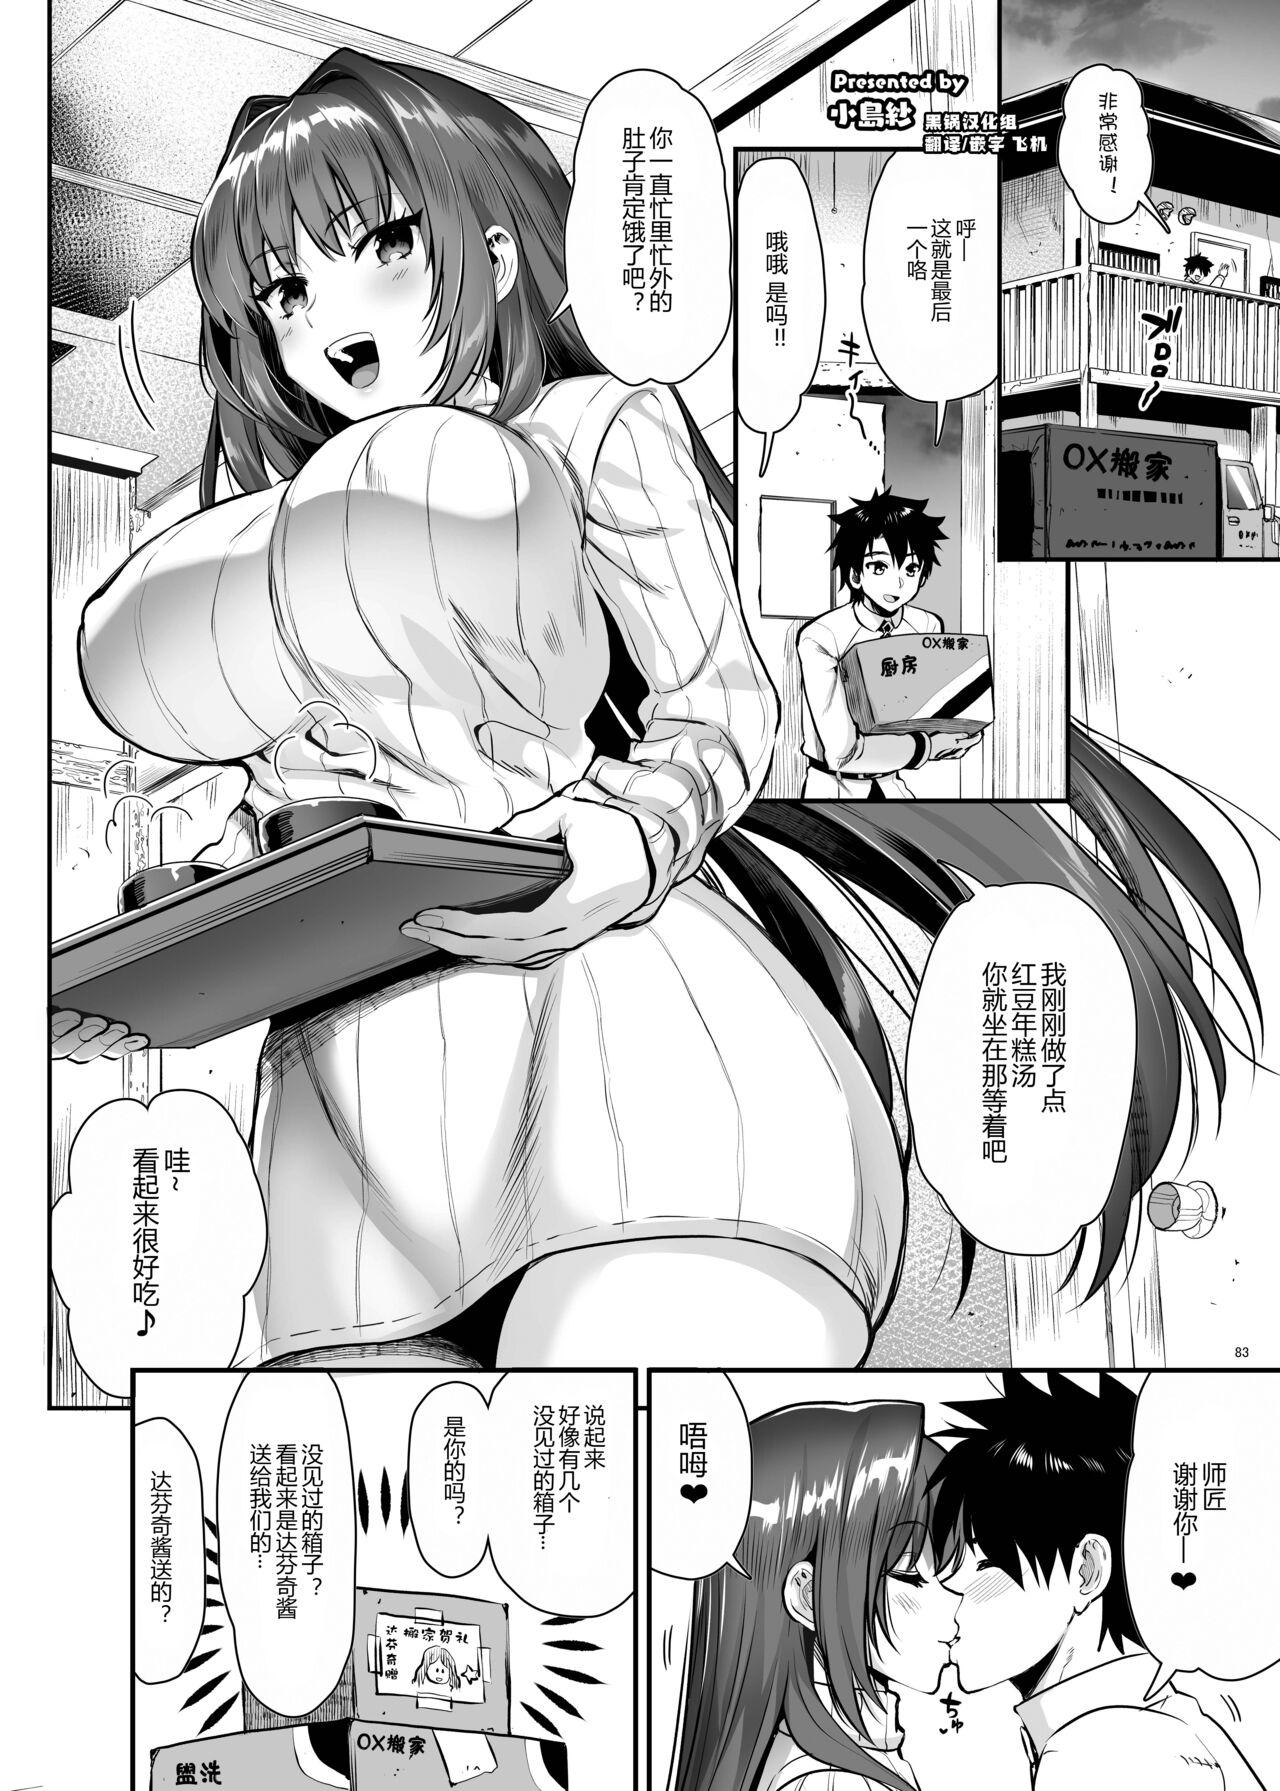 Man Scathach - Fate grand order Sperm - Page 1